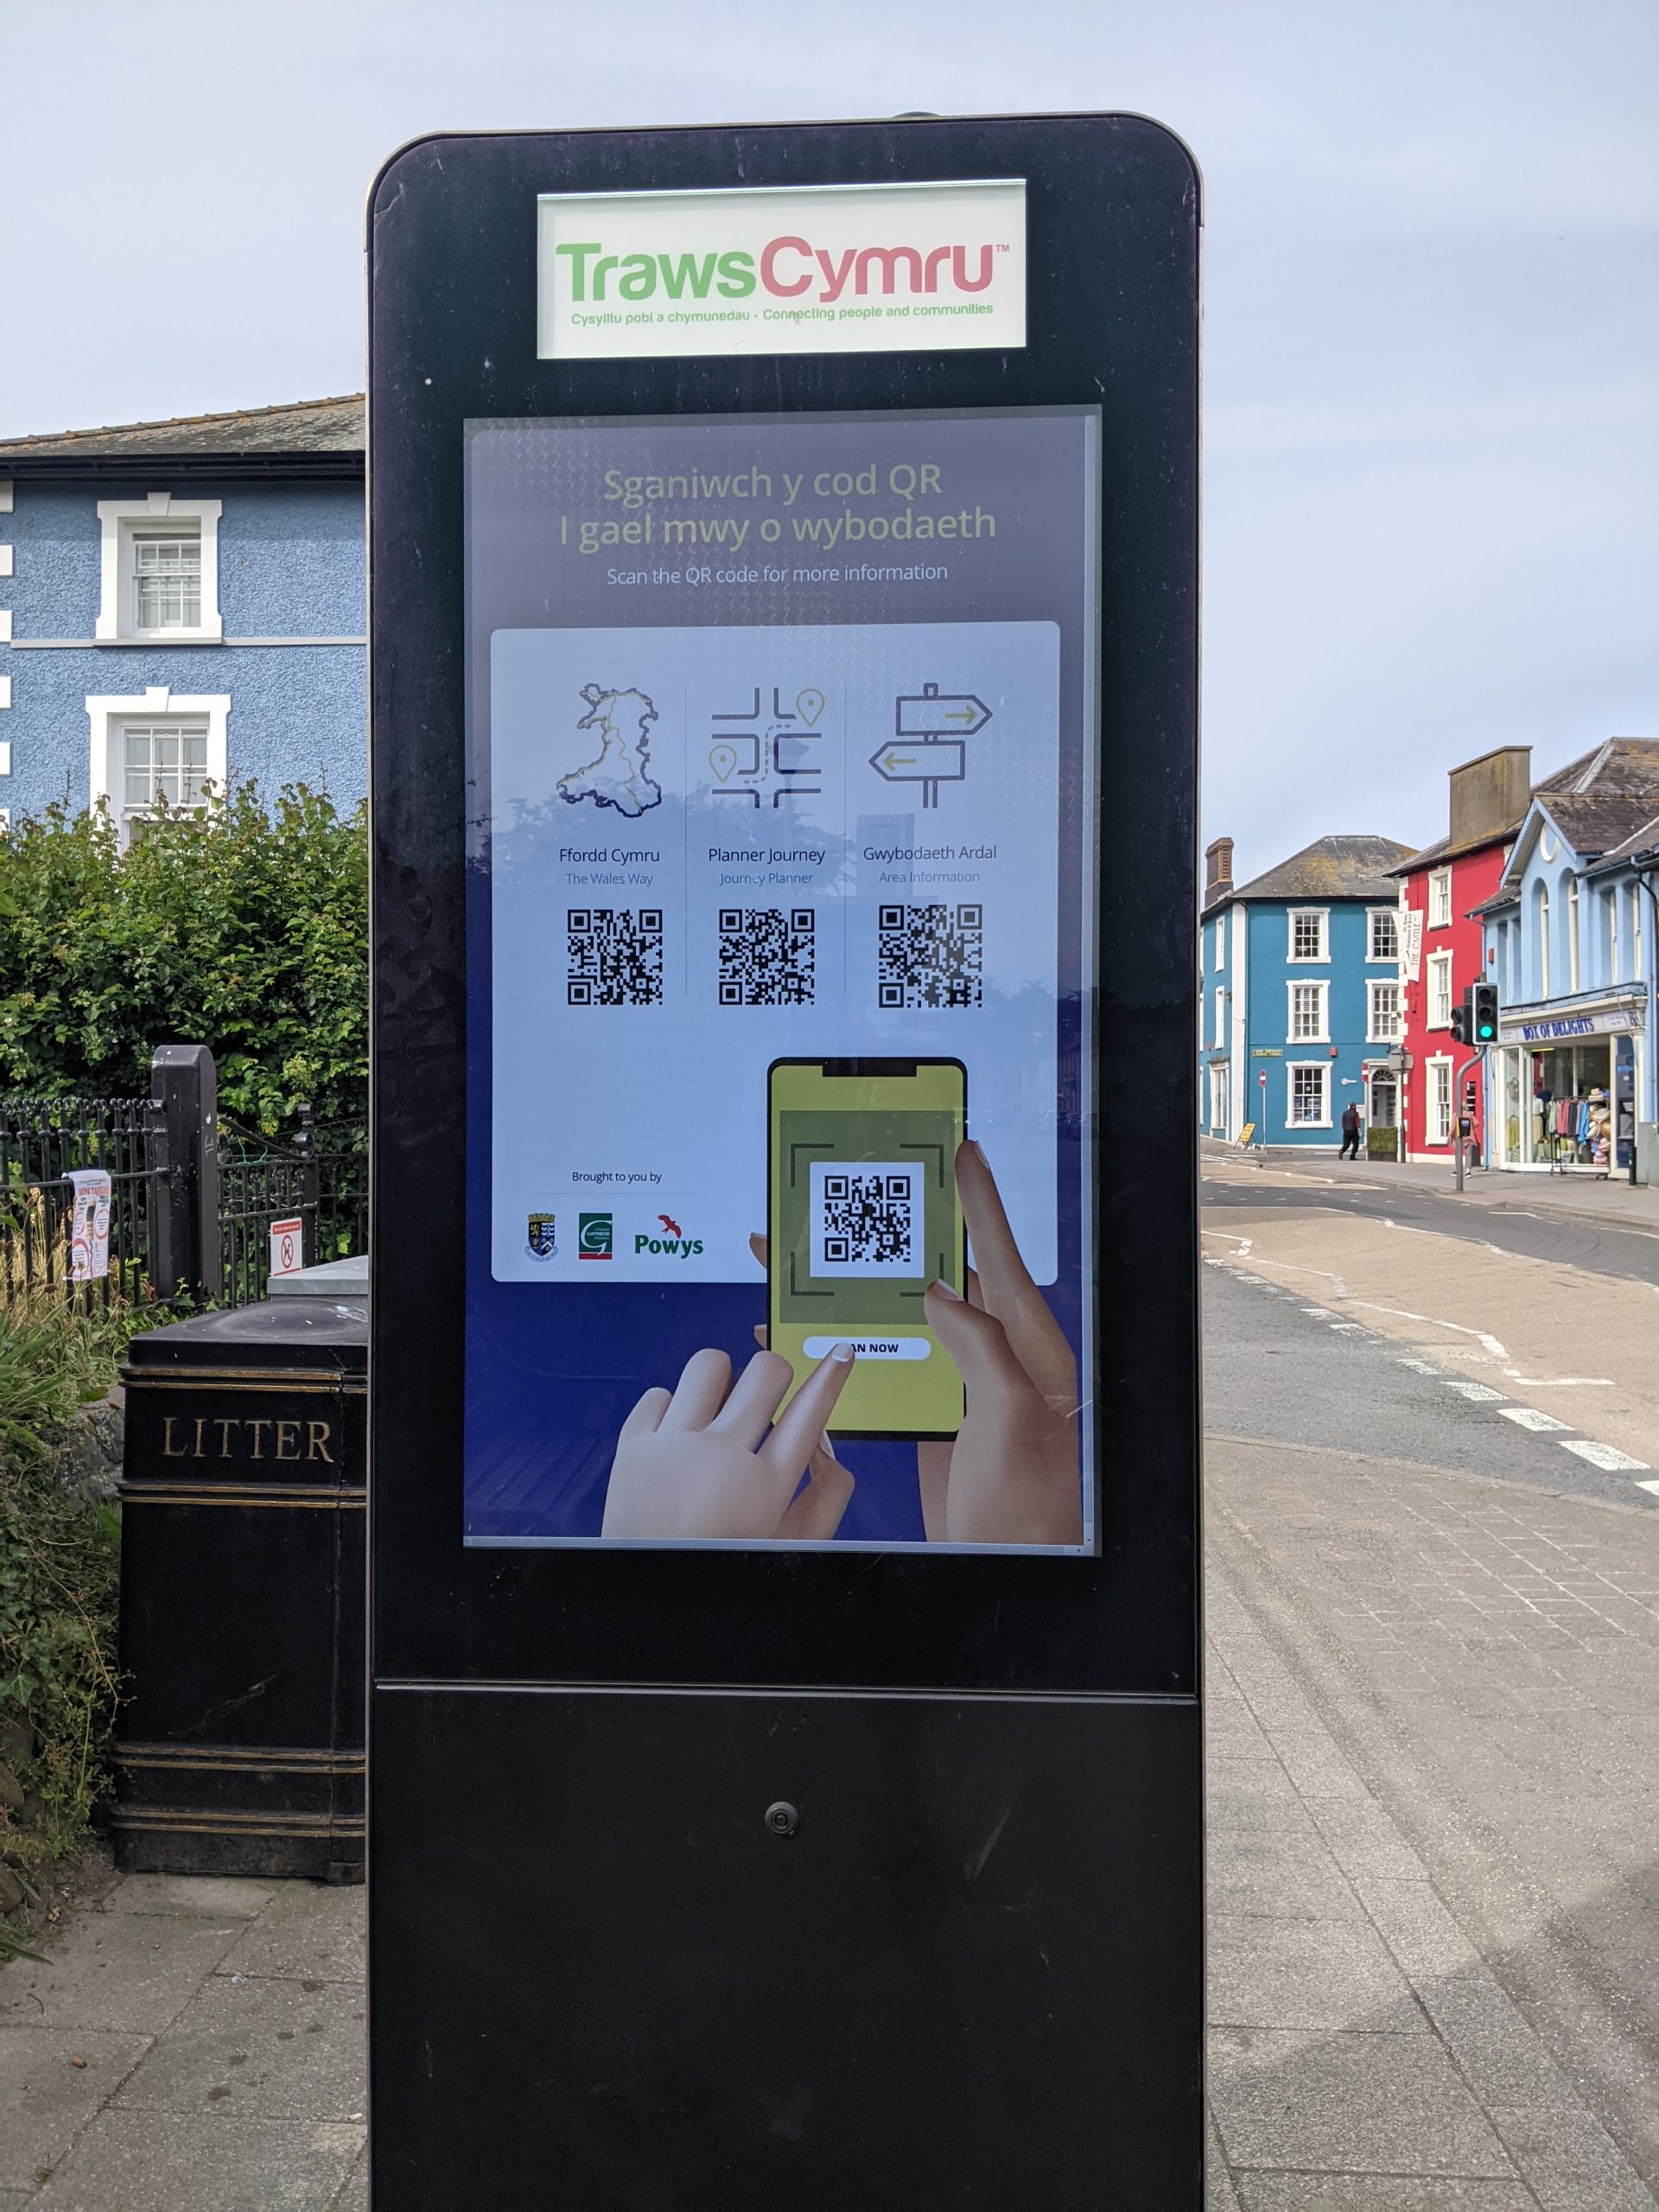 Digital billboard in the street with instructions on how to use an app to find destinations and routes around the local area.